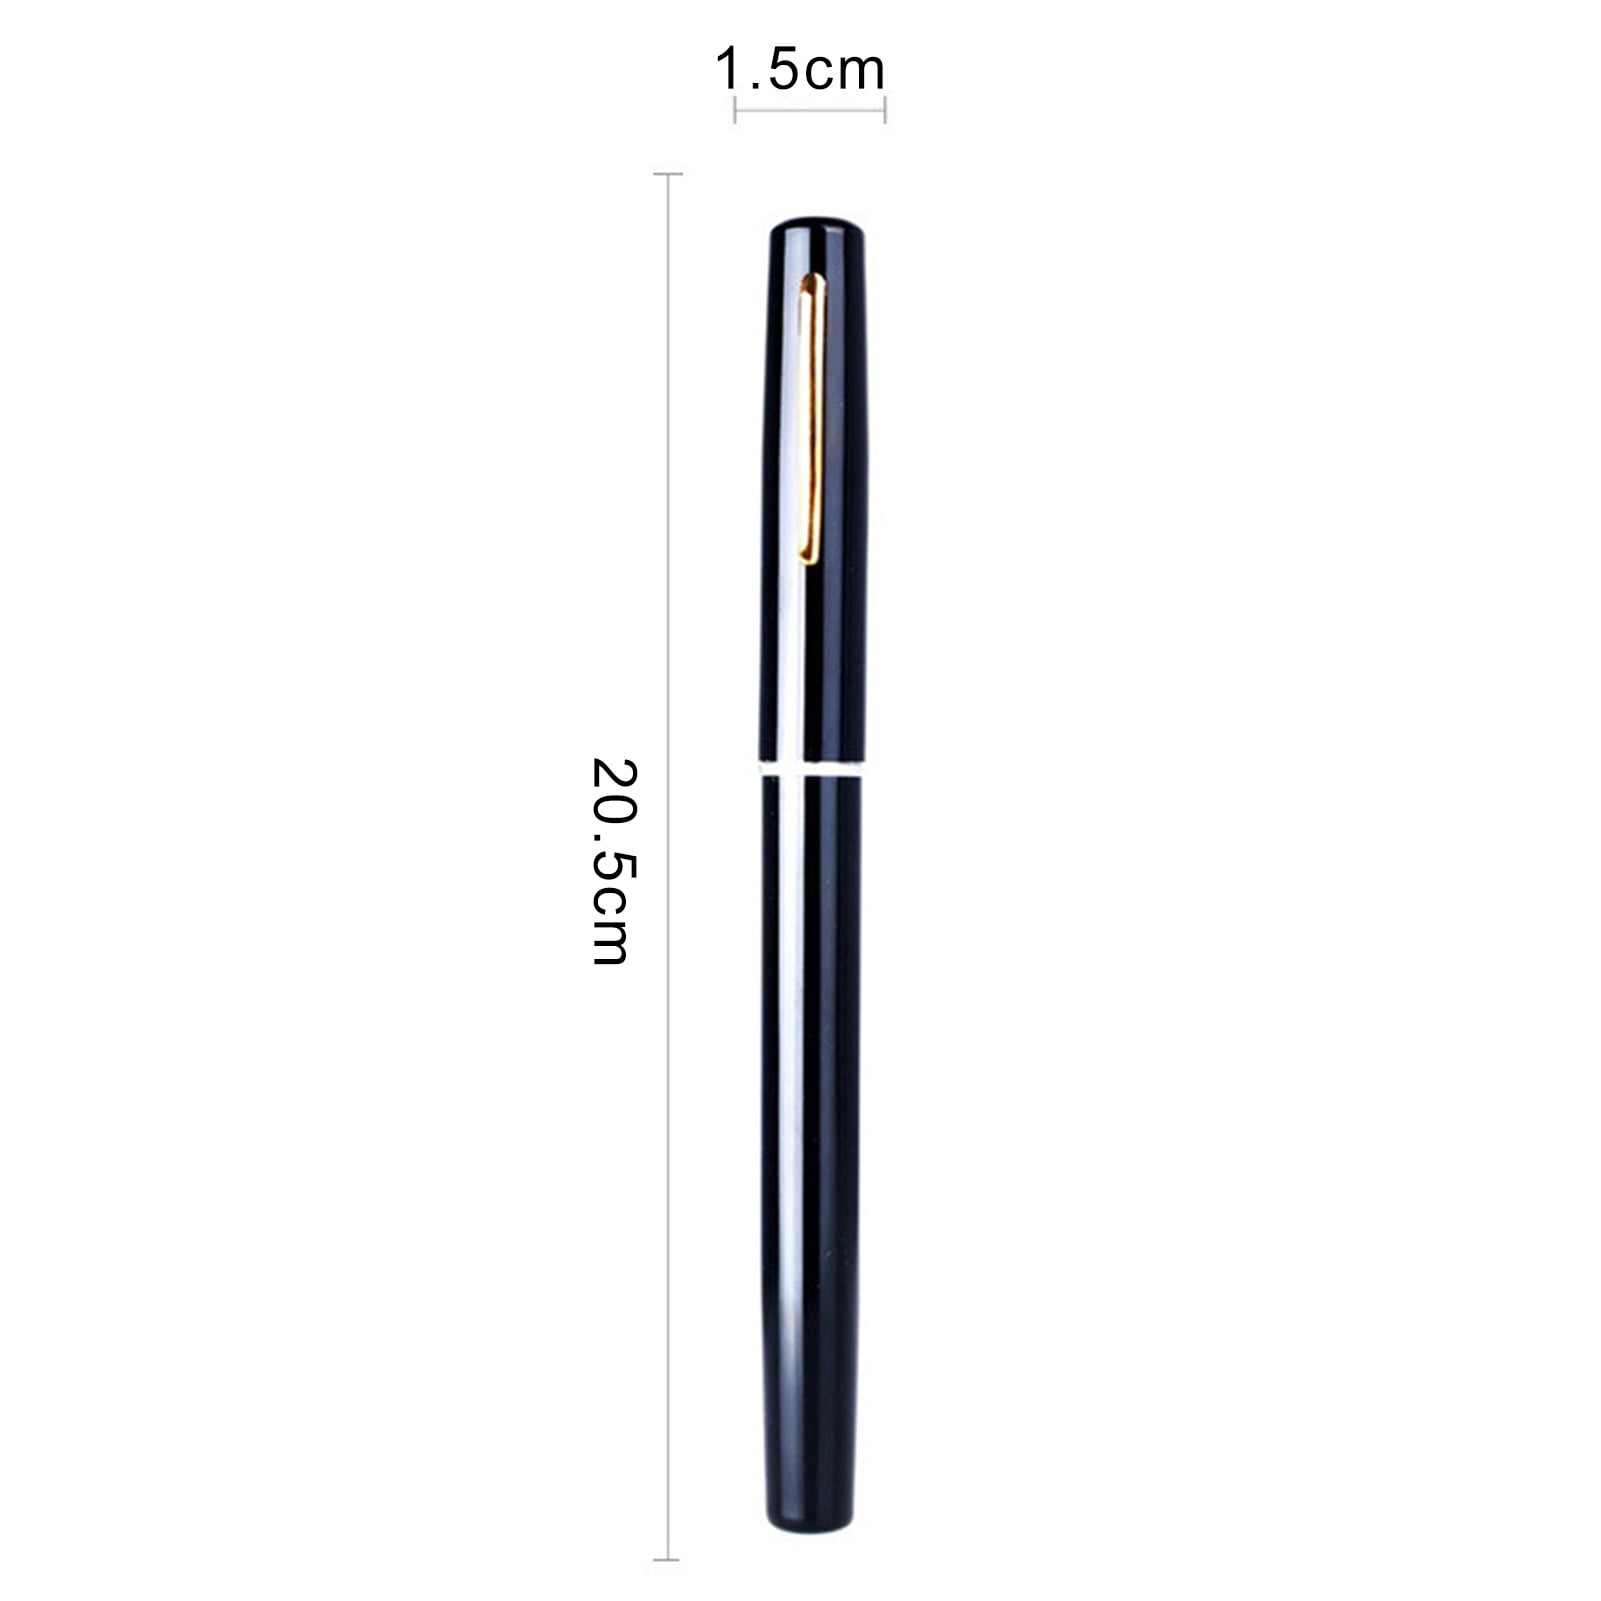 Rod Reel Combo Telescopic Mini Fishing Pole Pen Shape Folded With Wheel Outdoor  Portable Pocket Accessories 230809 From Chao07, $8.92